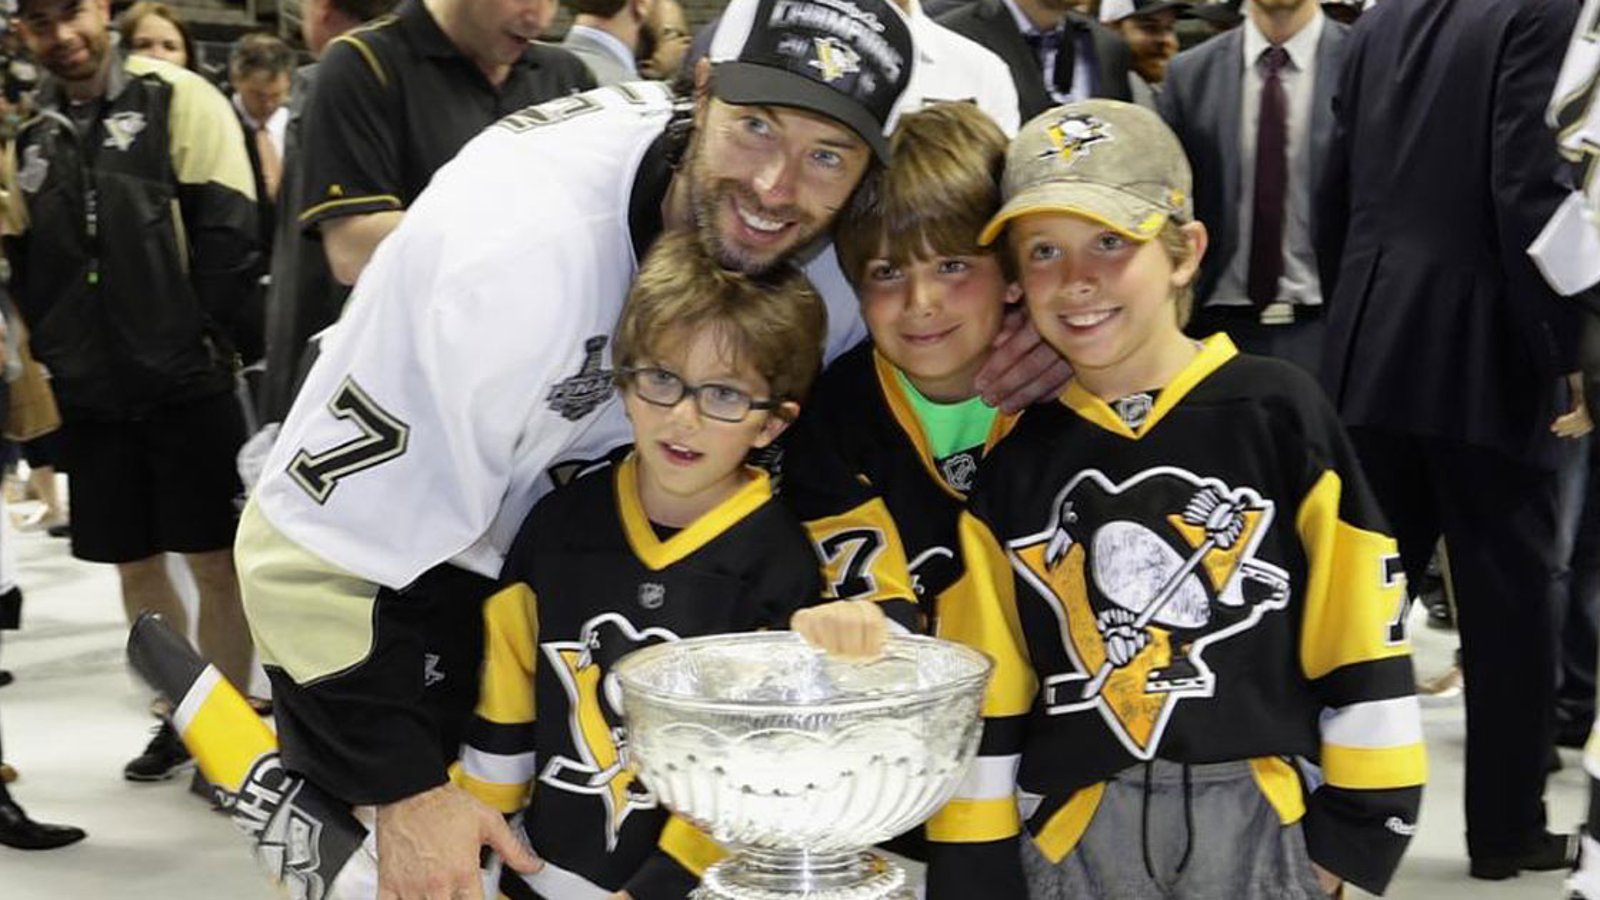 Cullen's kids pranked Crosby and former Pens teammates